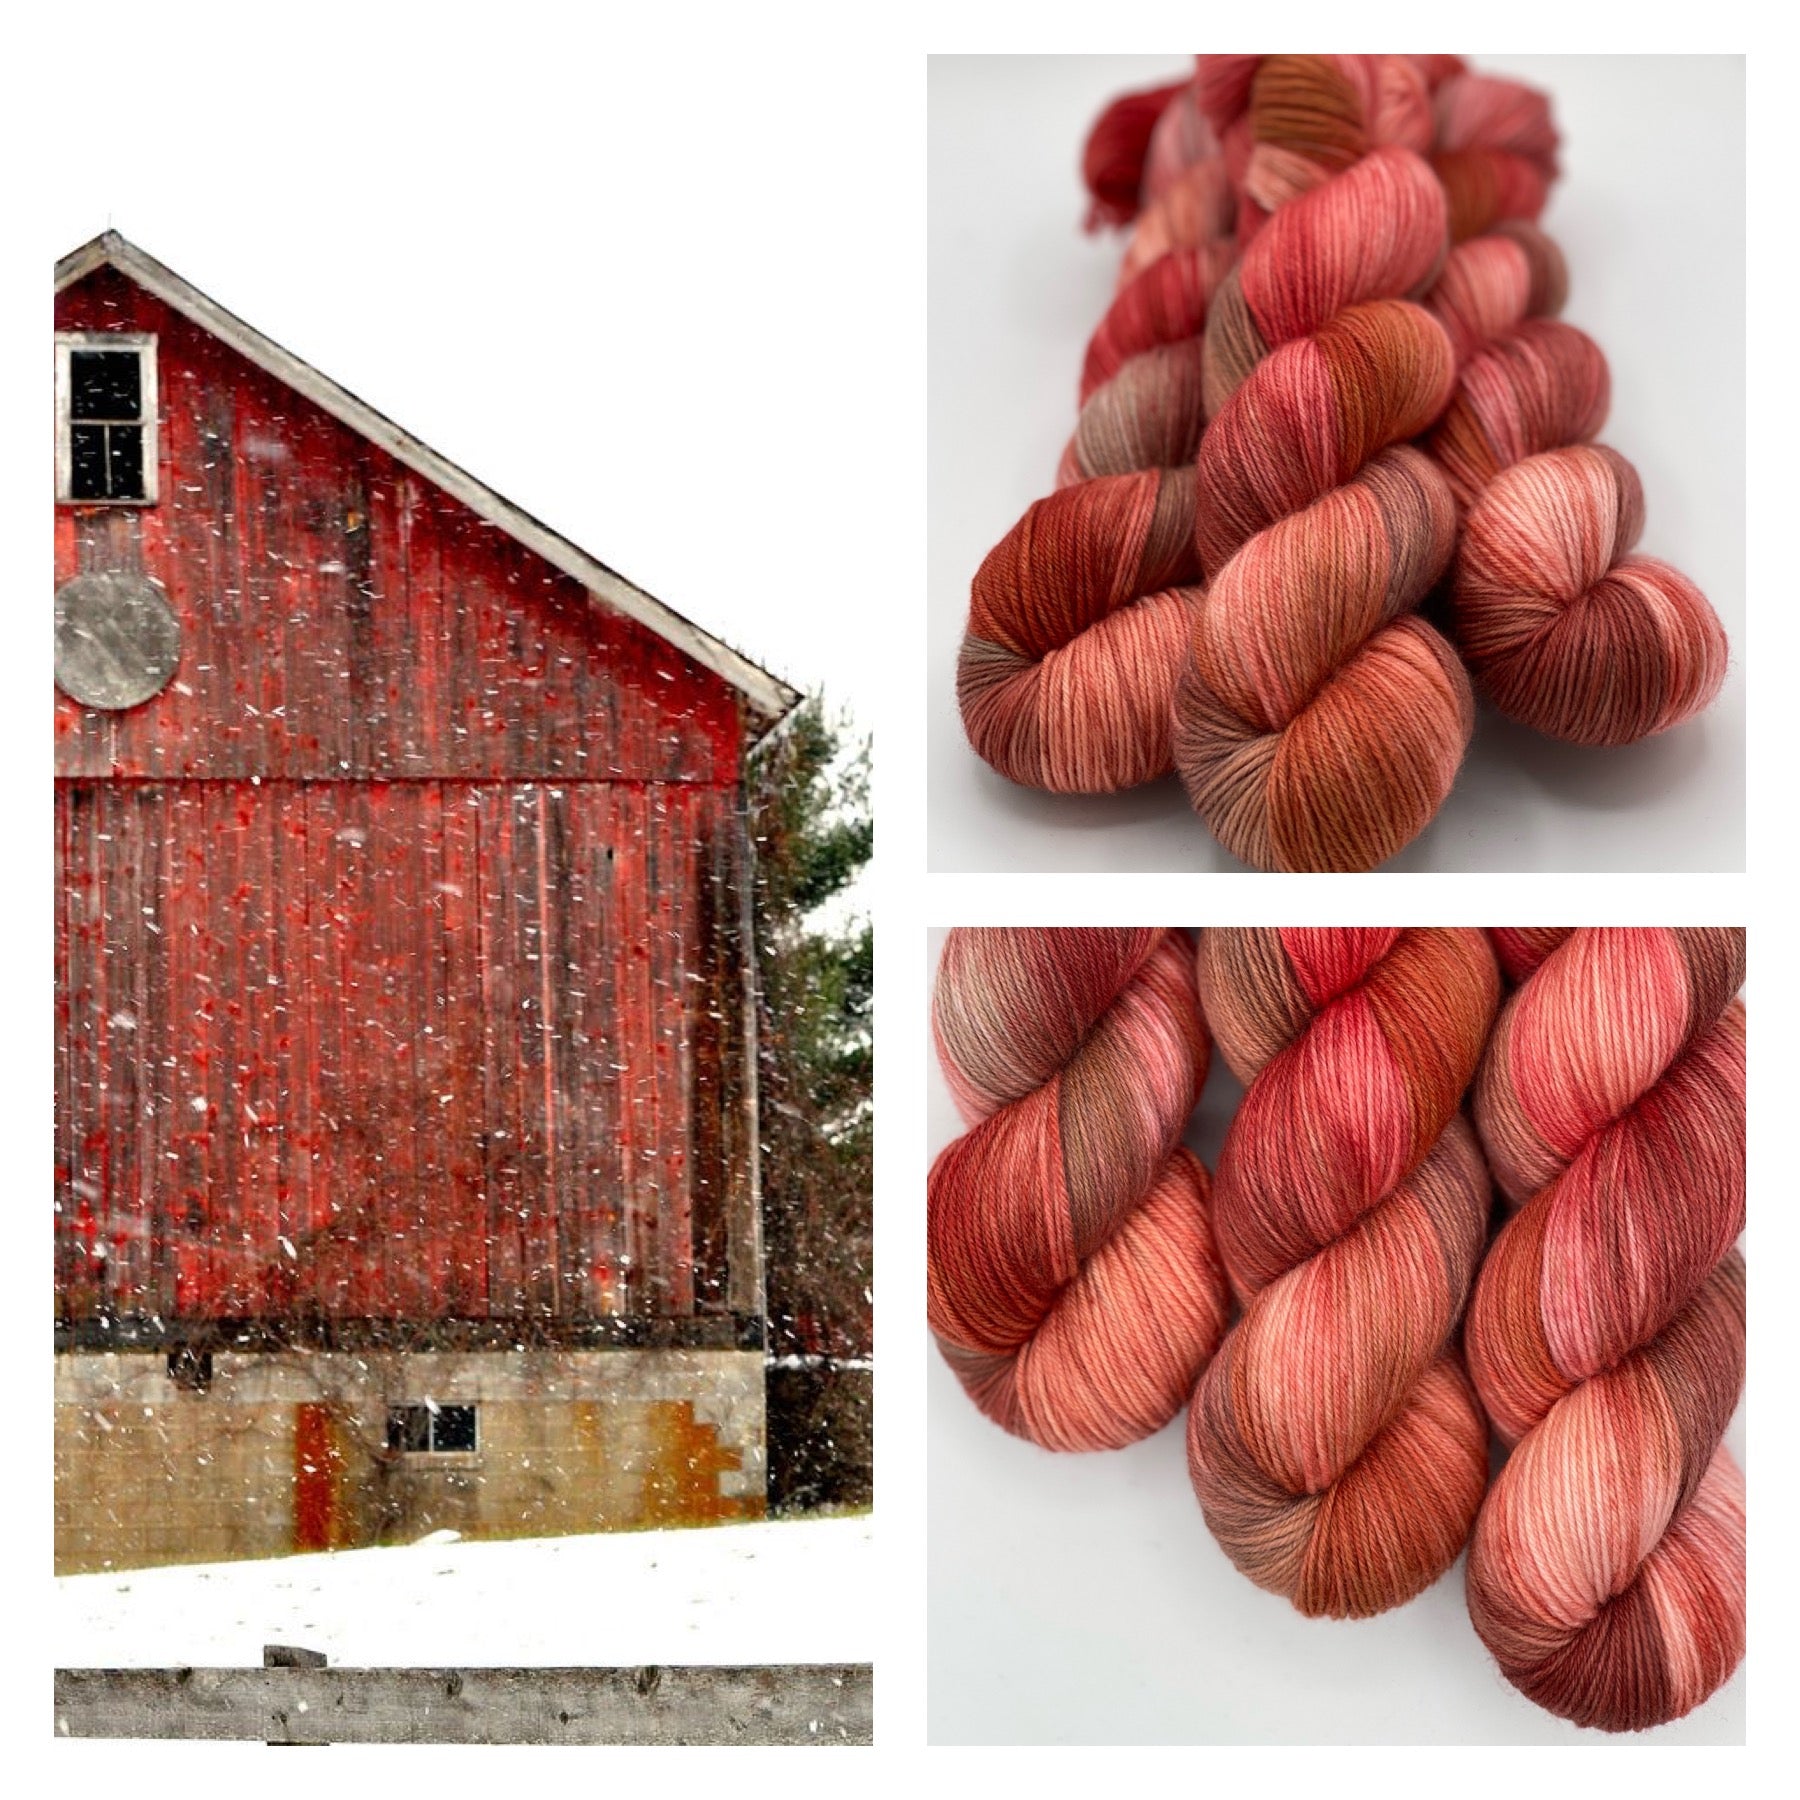 That Old Red Barn - Arcane Fibre Works